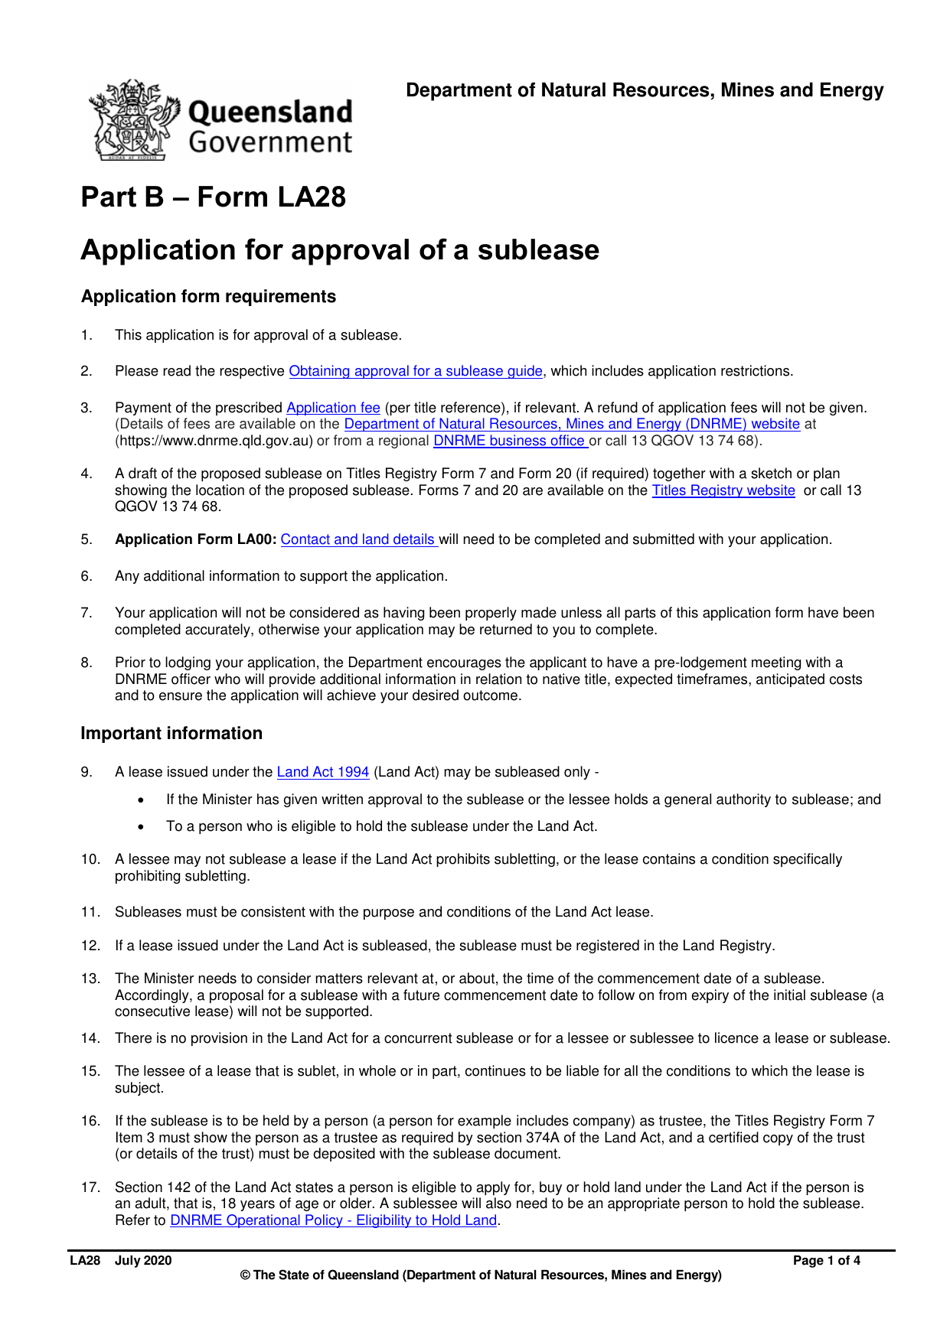 Form LA28 Part B Application for Approval of a Sublease - Queensland, Australia, Page 1